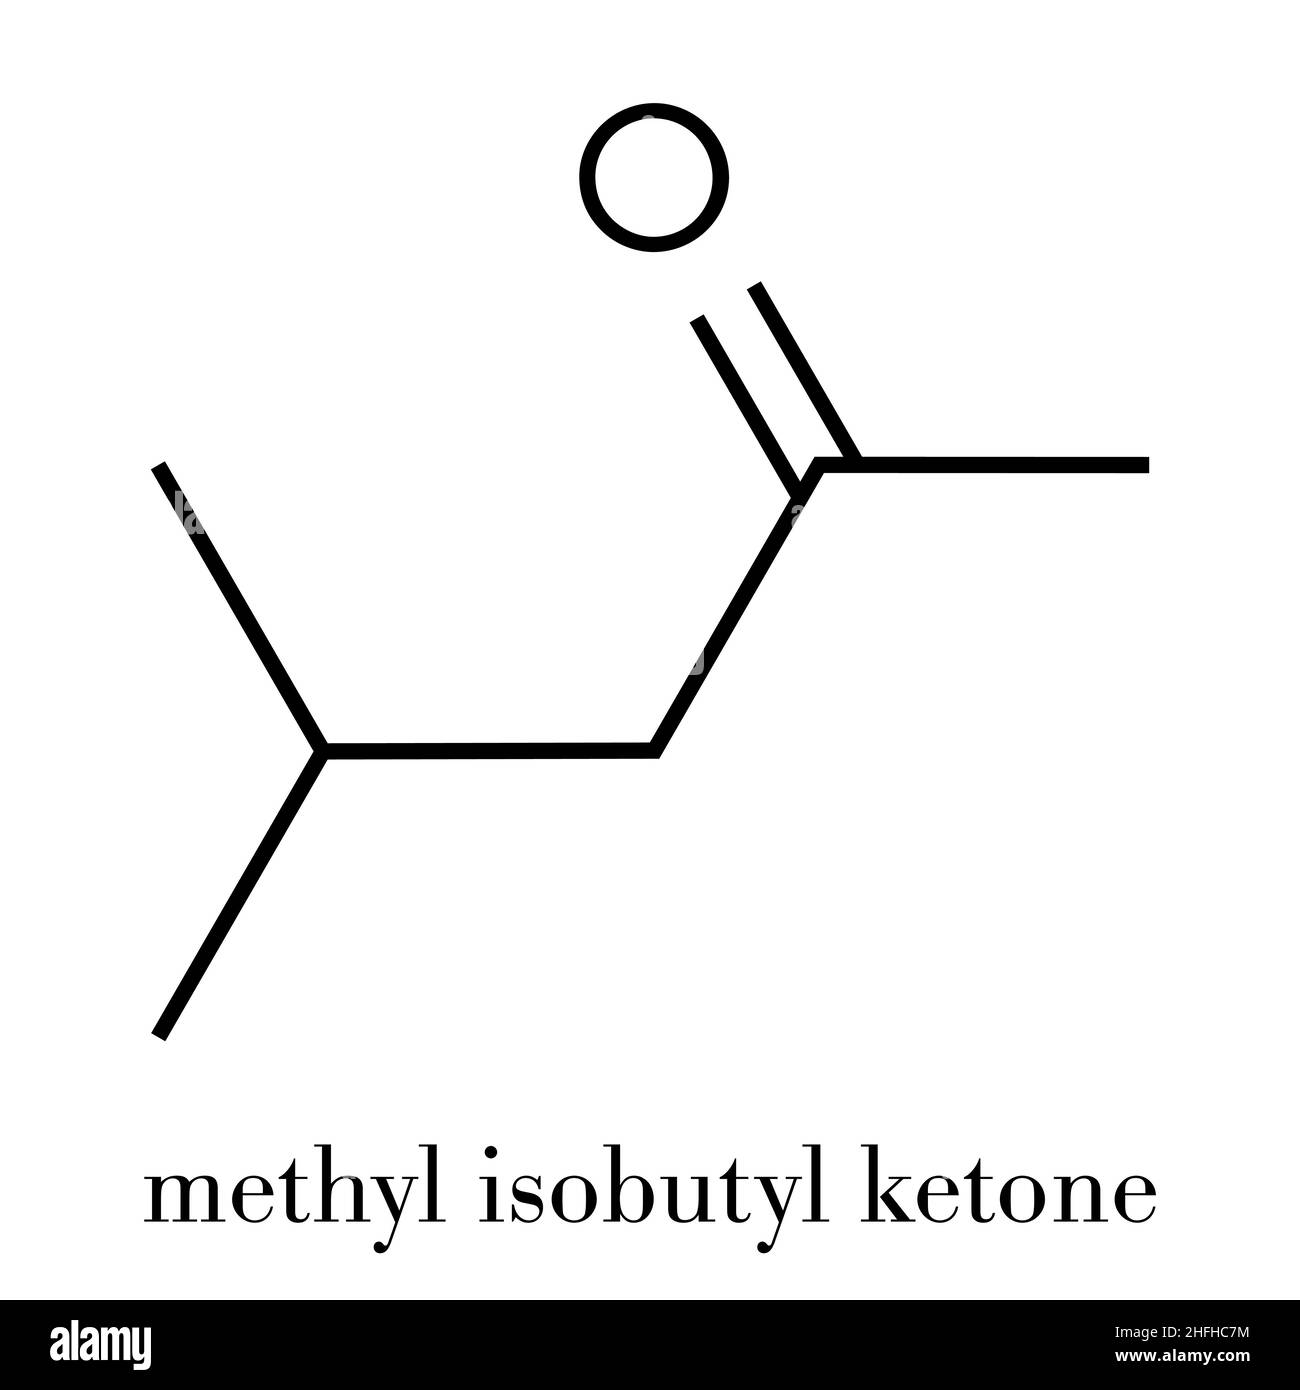 Methyl isobutyl ketone molecule. Used as chemical solvent and to denature alcohol. Skeletal formula. Stock Vector